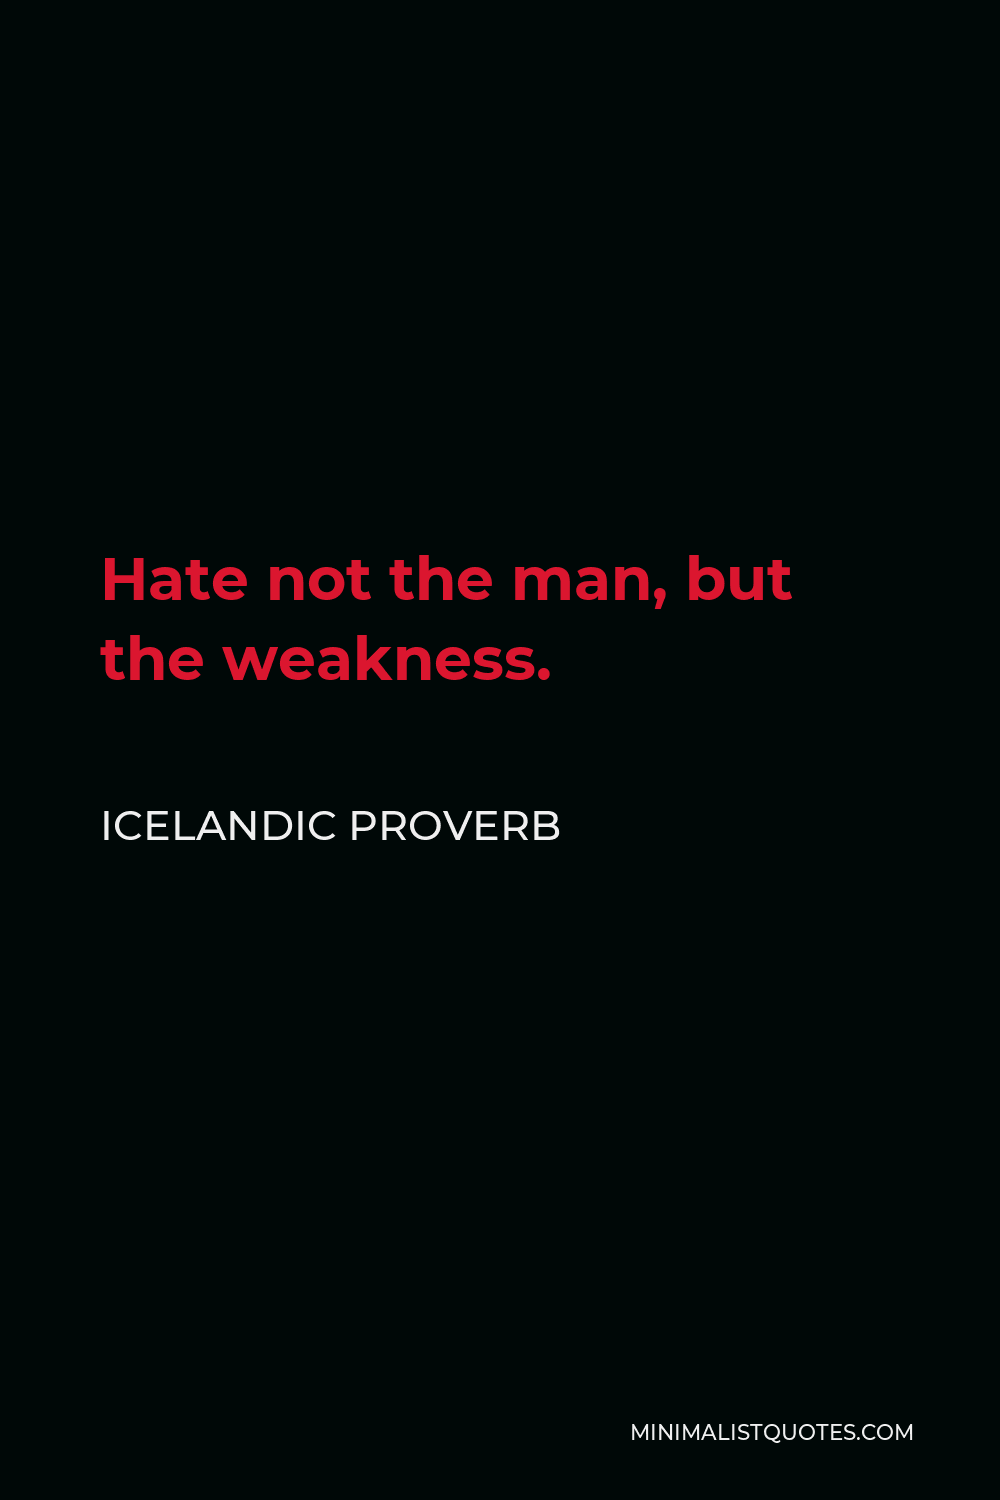 Icelandic Proverb Quote - Hate not the man, but the weakness.